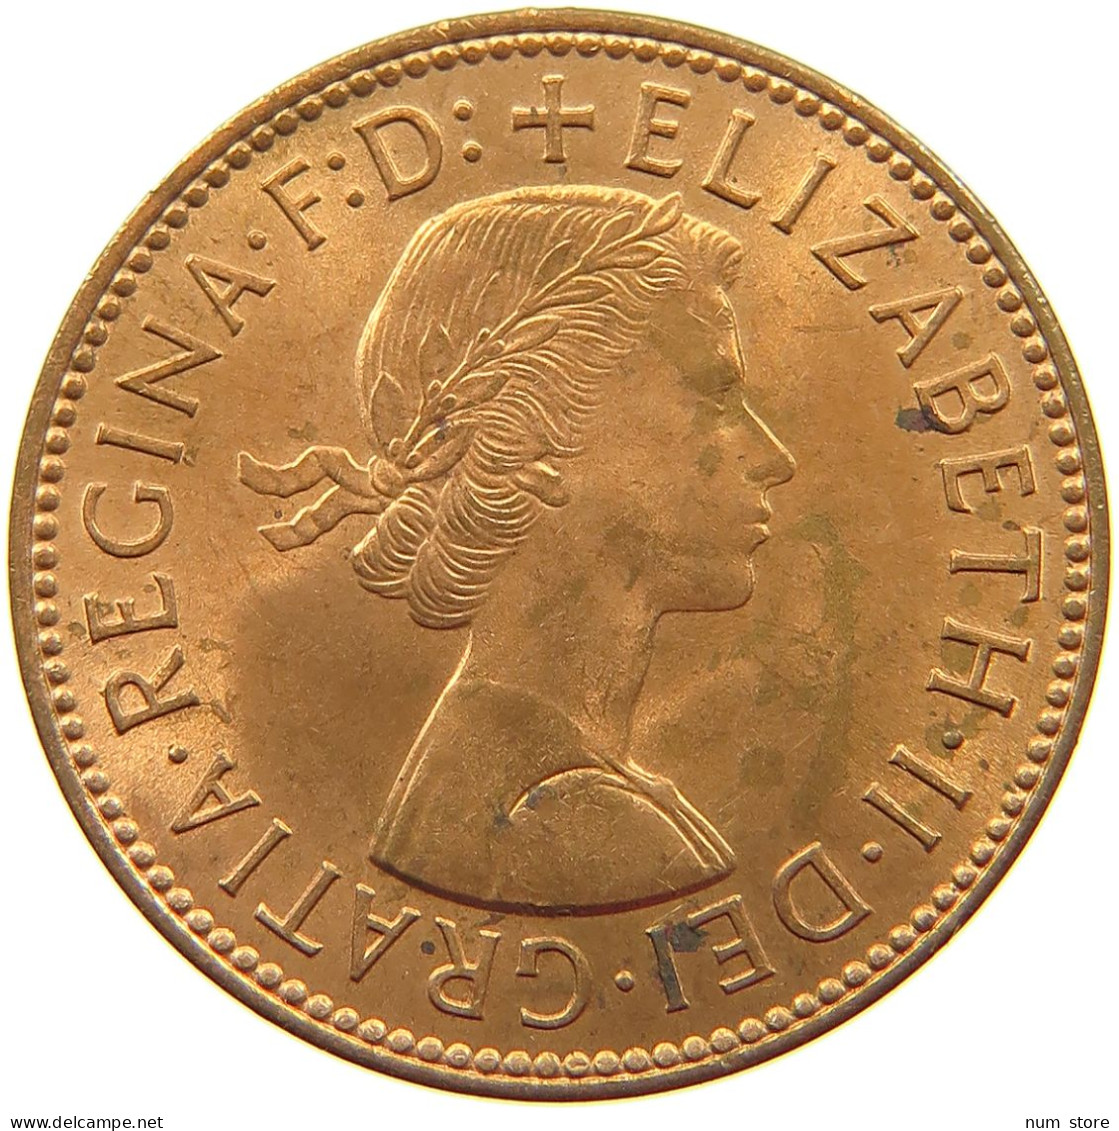 GREAT BRITAIN HALFPENNY 1963 TOP #a039 0353 - C. 1/2 Penny